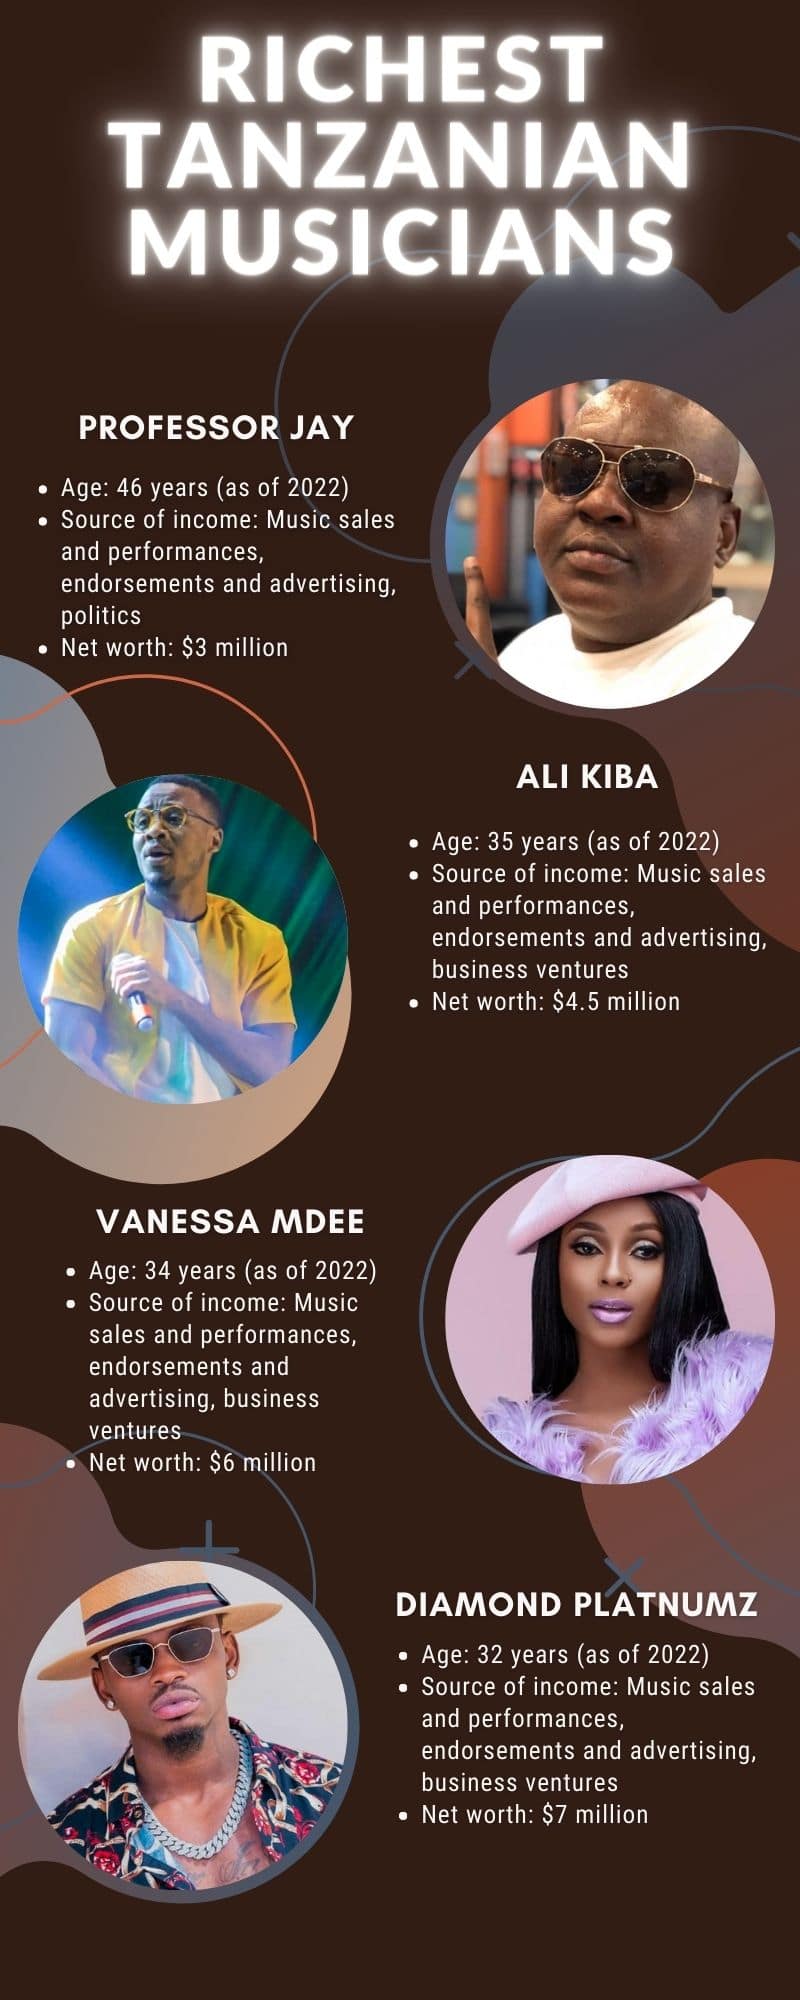 Top 10 richest Tanzanian musicians and their net worth in 2022